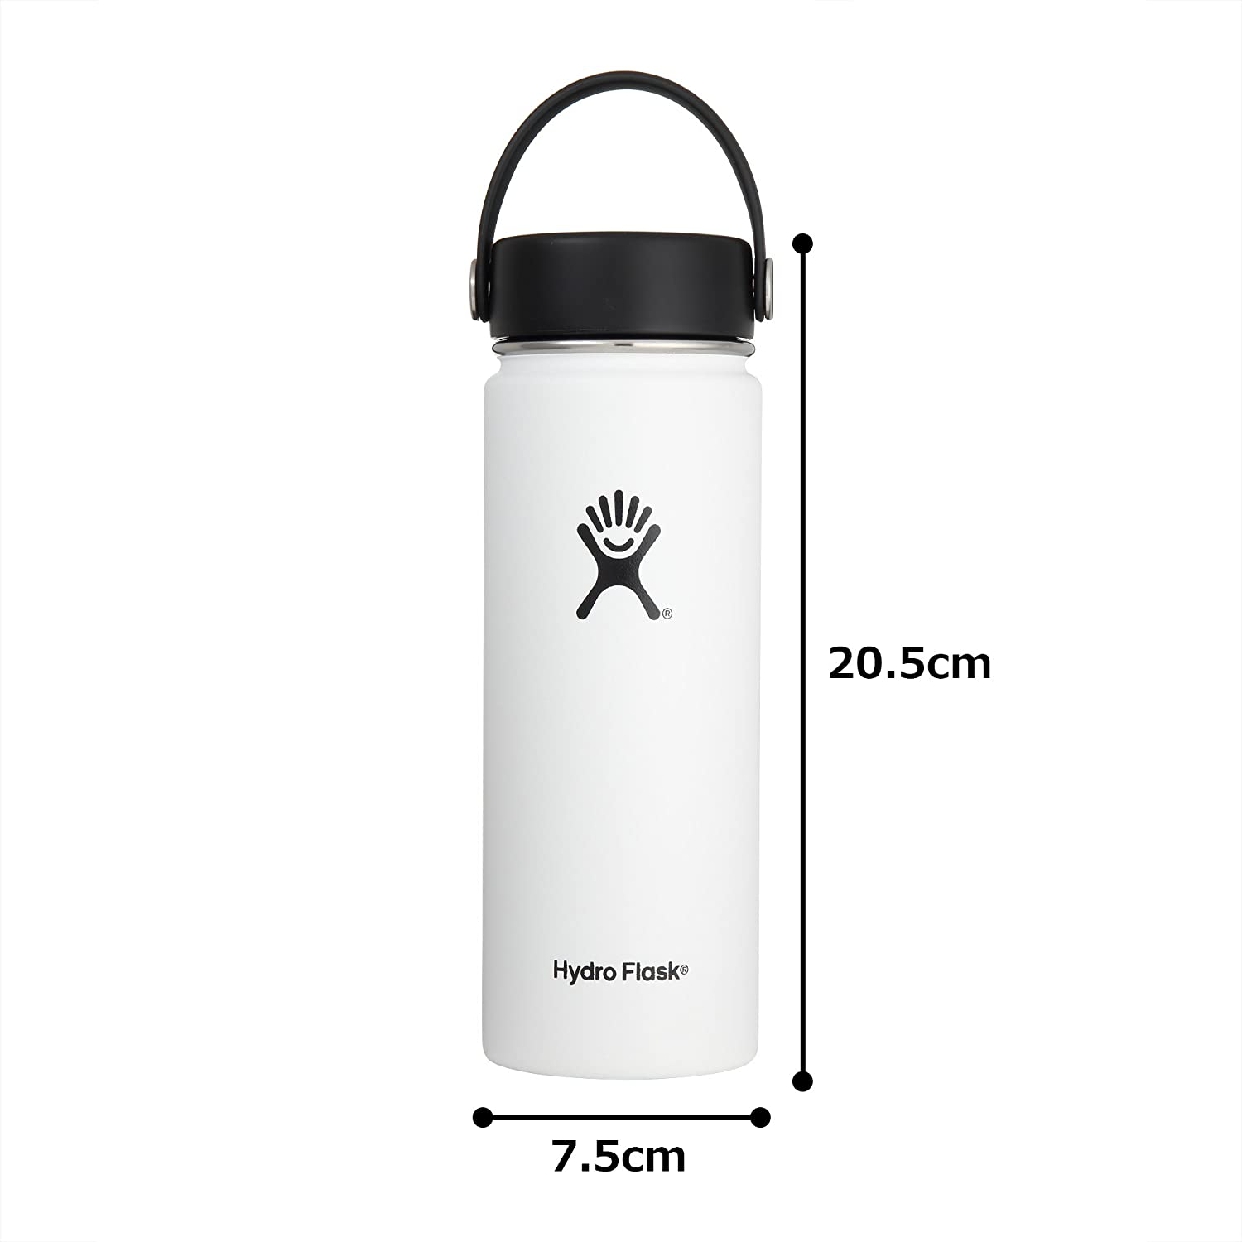 Hydro Flask(ハイドロフラスク) 18 oz Wide Mouth Whiteの商品画像サムネ2 